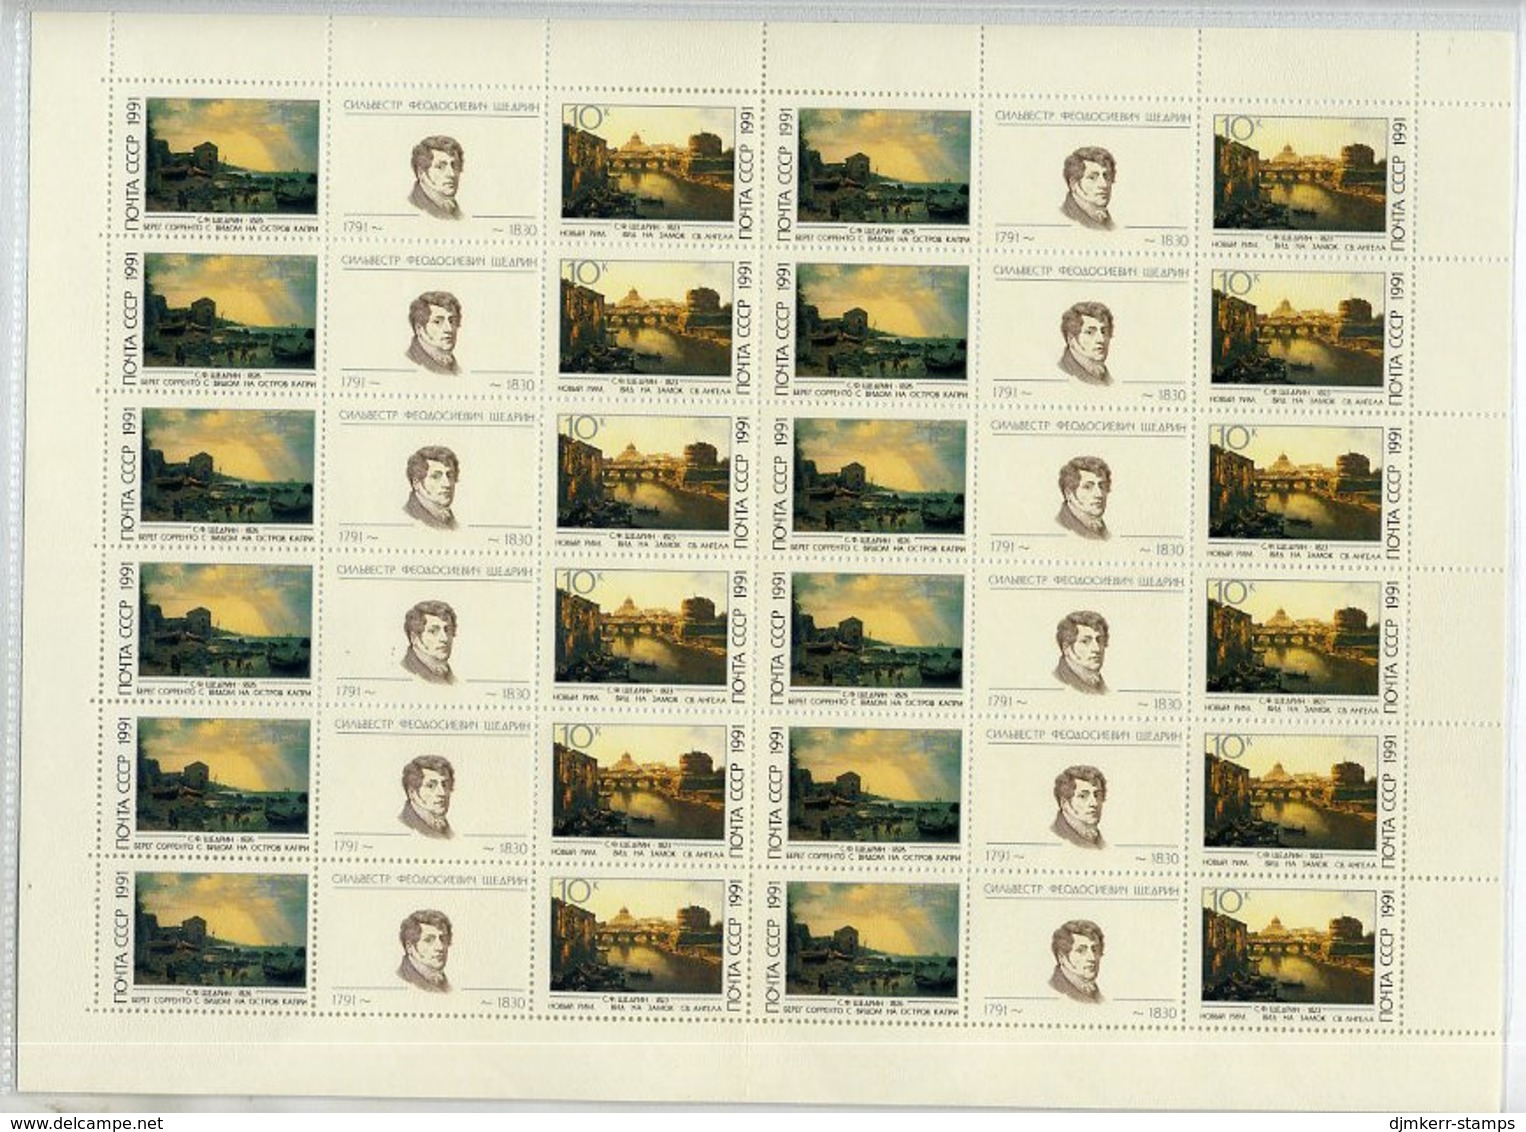 SOVIET UNION 1991 Artists' Anniversaries Complete Sheets With 12 Sets MNH / **. Michel 6465-68 - Fogli Completi